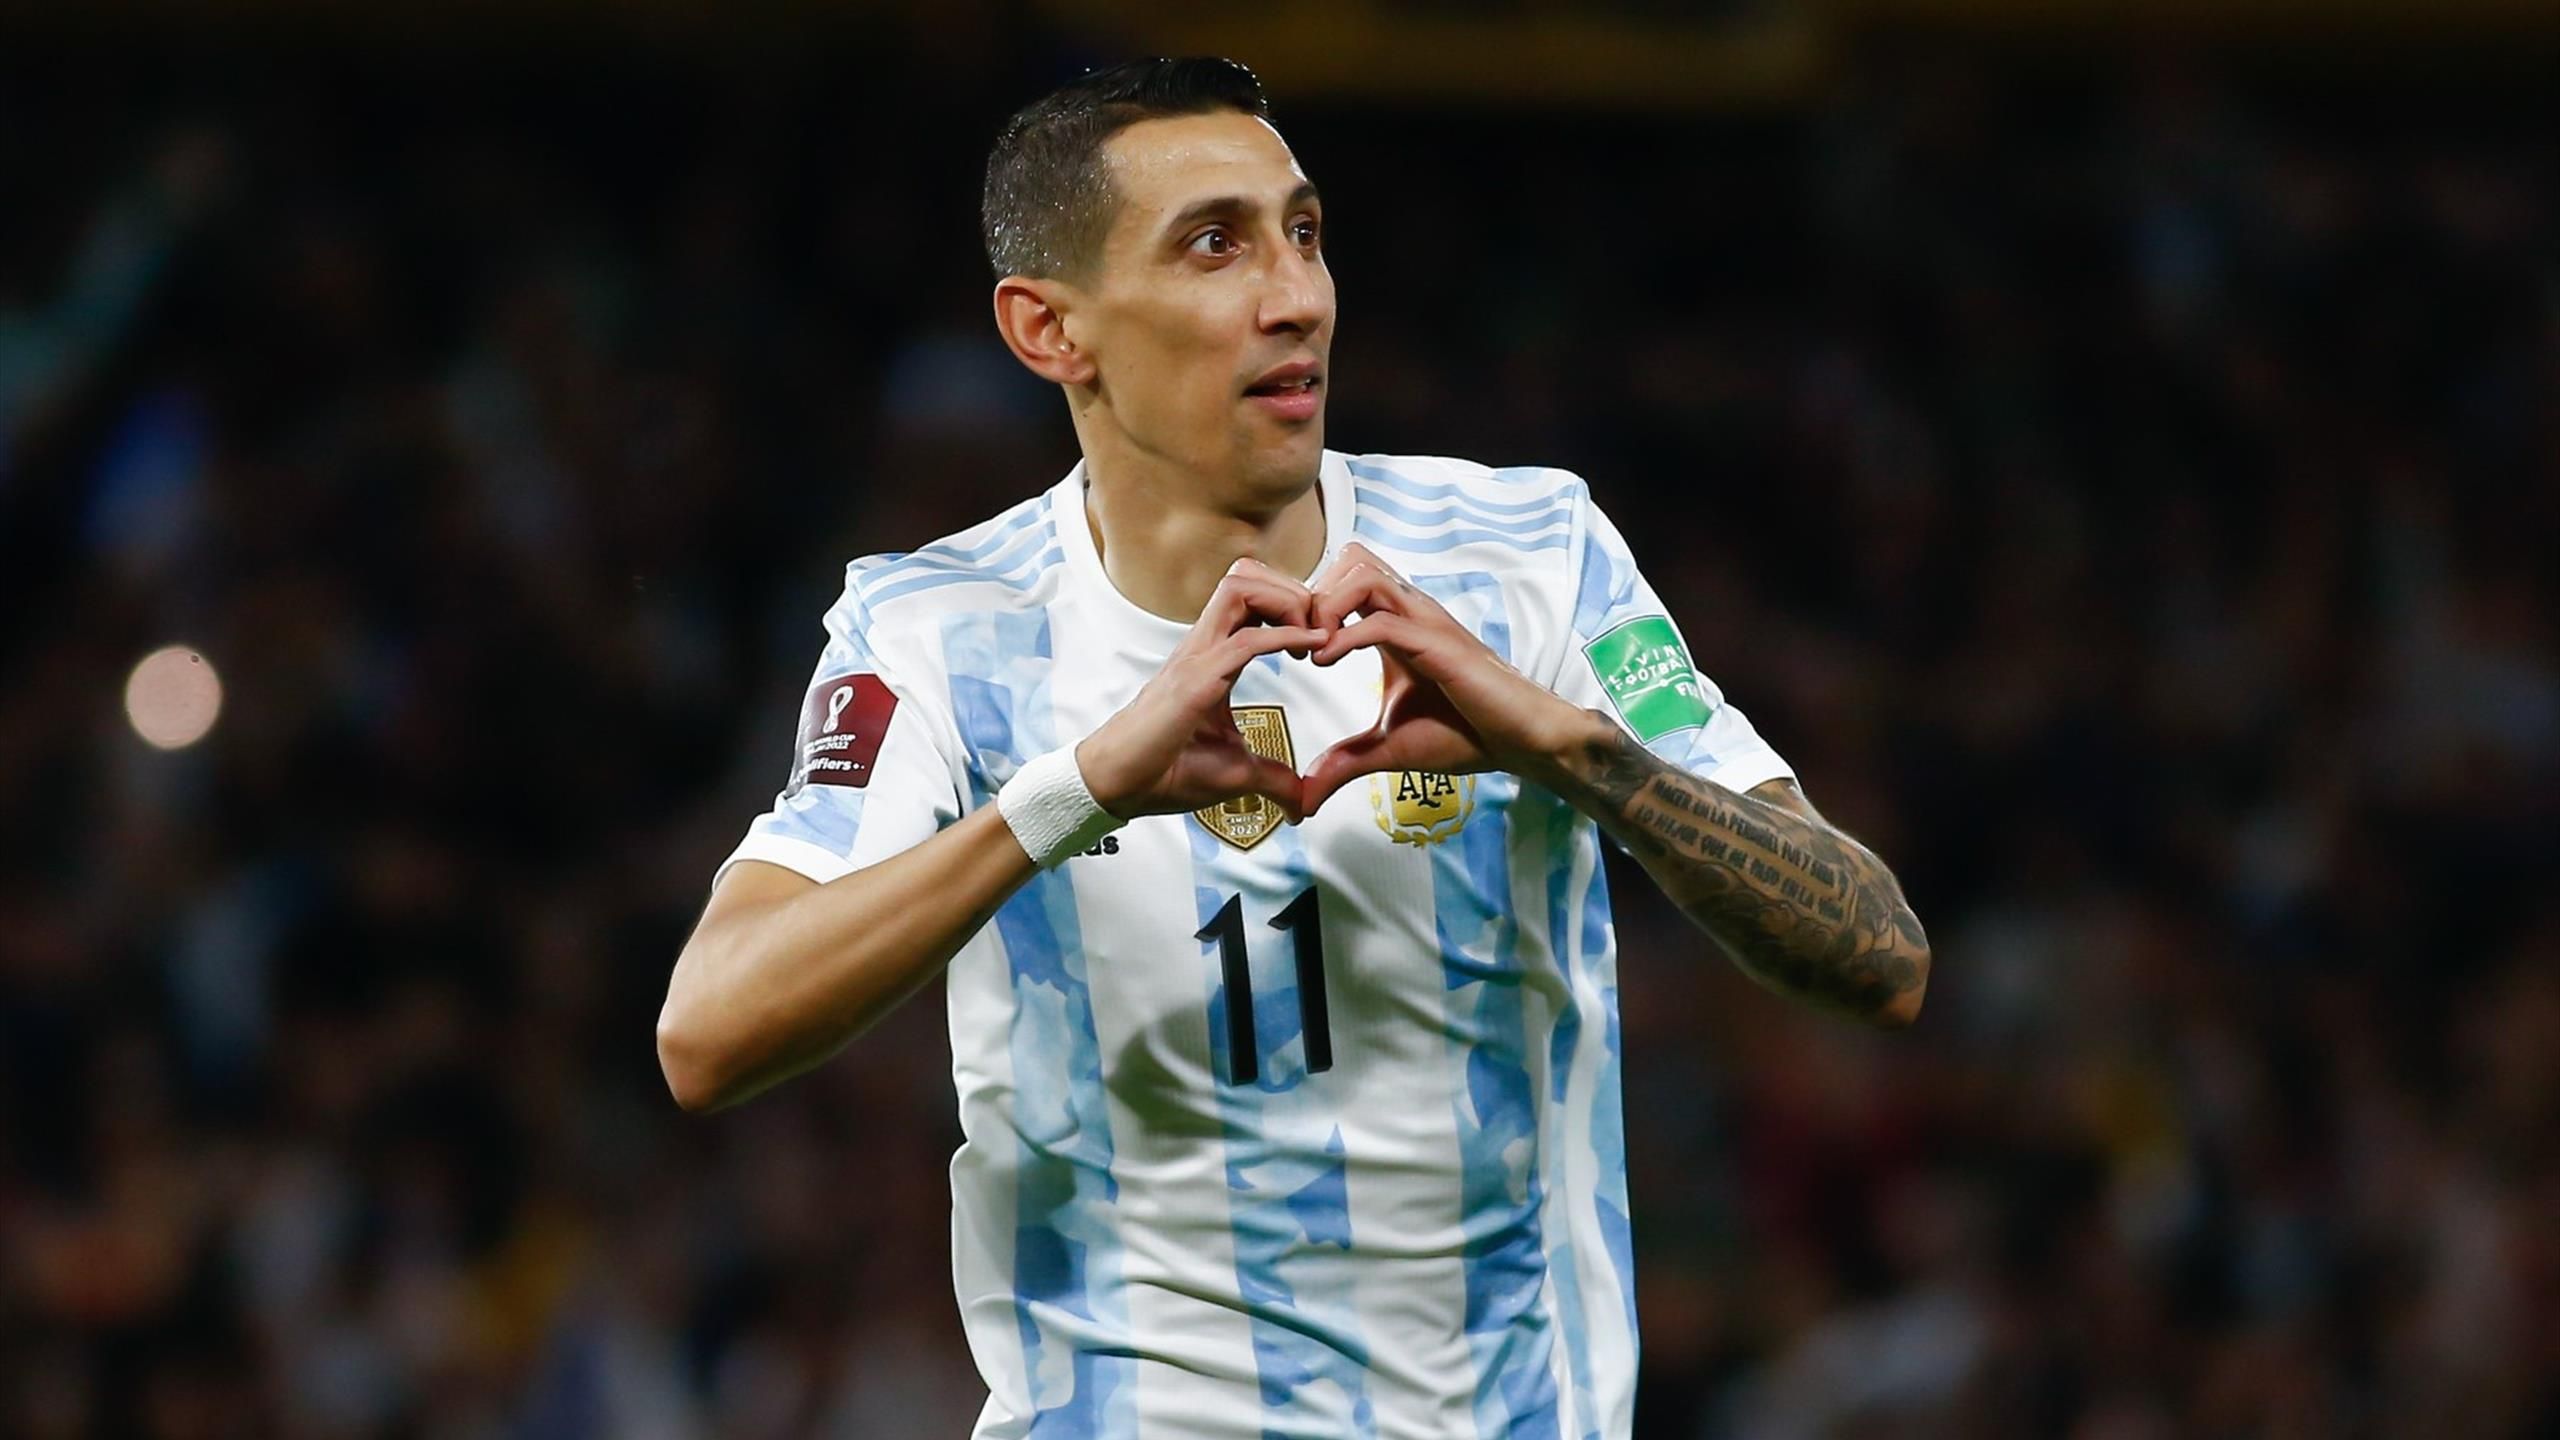 Probably my last match with this shirt in Argentina - Angel Di Maria appears on brink of international retirement